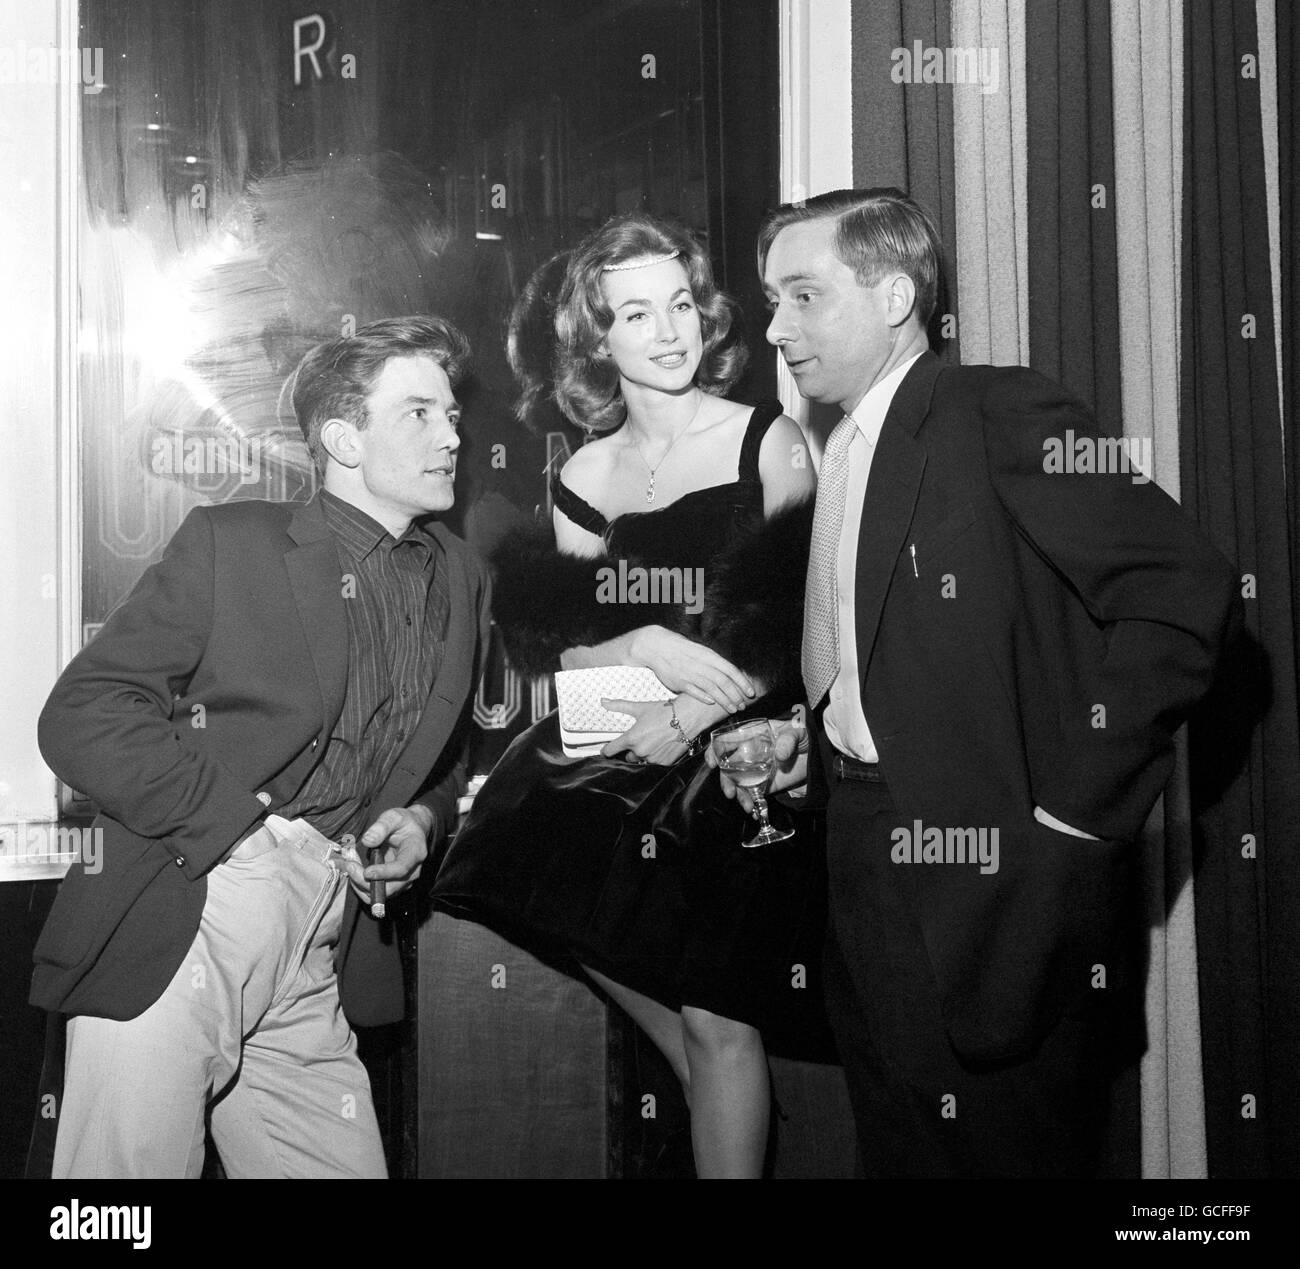 Star of the film Albert Finney (l) co-star Shirley Anne Field and author Alan Sillitoe (r) pictured in a London pub when attending a pre-premier party of 'Saturday Night and Sunday Morning' which opens at the Warner Theatre. Many stars attended the party held to get the new film off to a good start. Shortly after this picture was taken Albert Finney made his way to the Cambridge Theatre where he is currently starring in 'Billy Liar'. Stock Photo